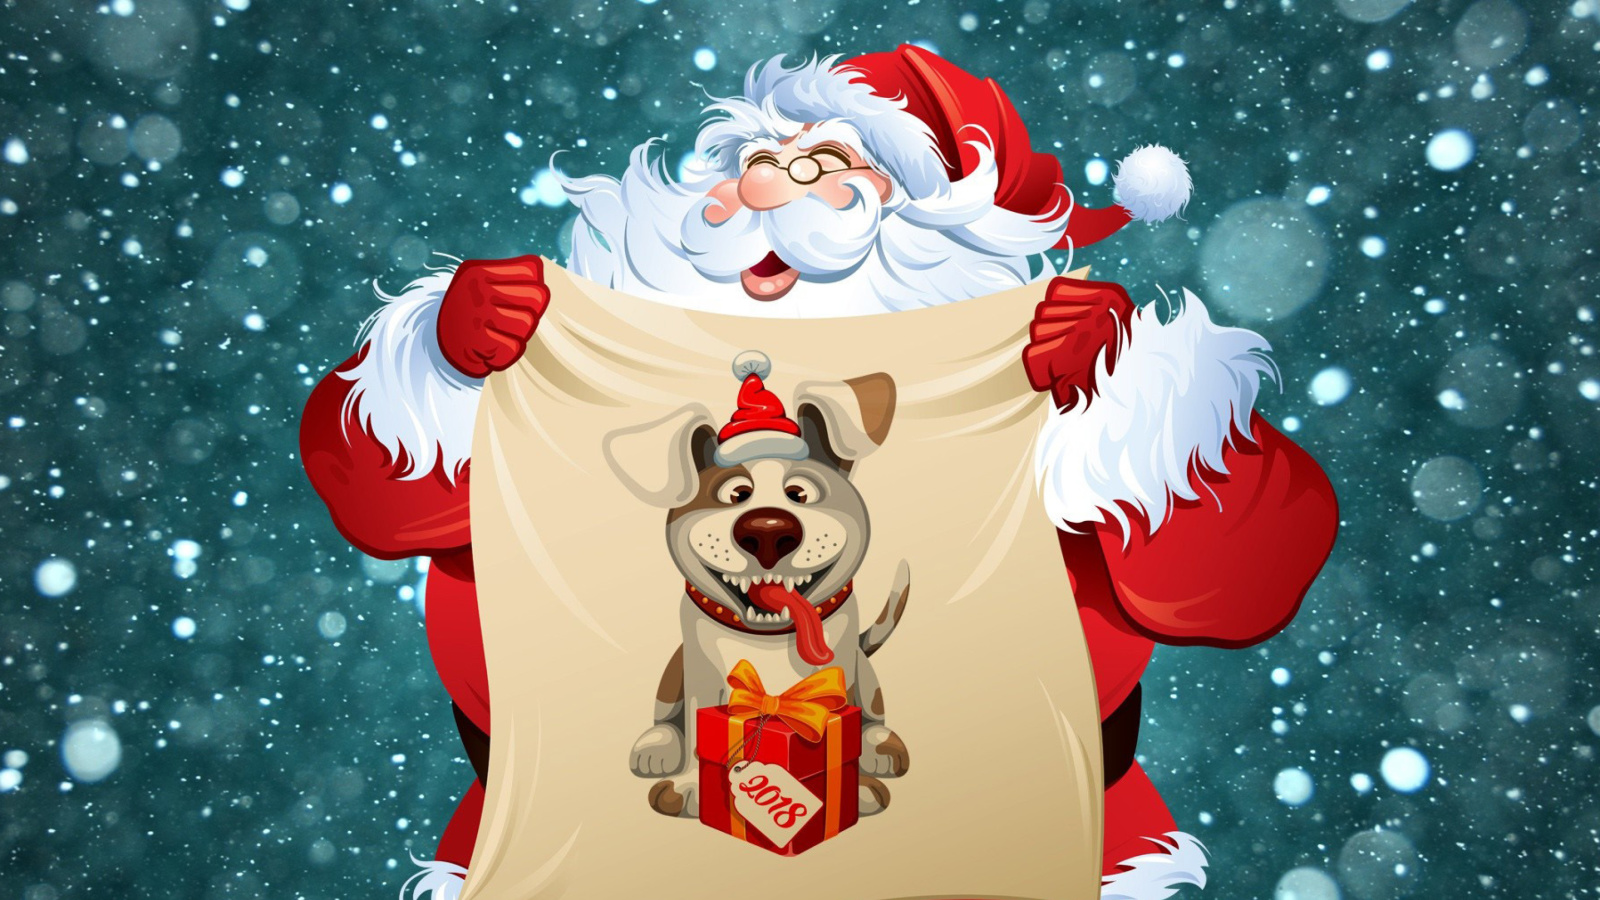 Happy New Year 2018 with Dog and Santa wallpaper 1600x900